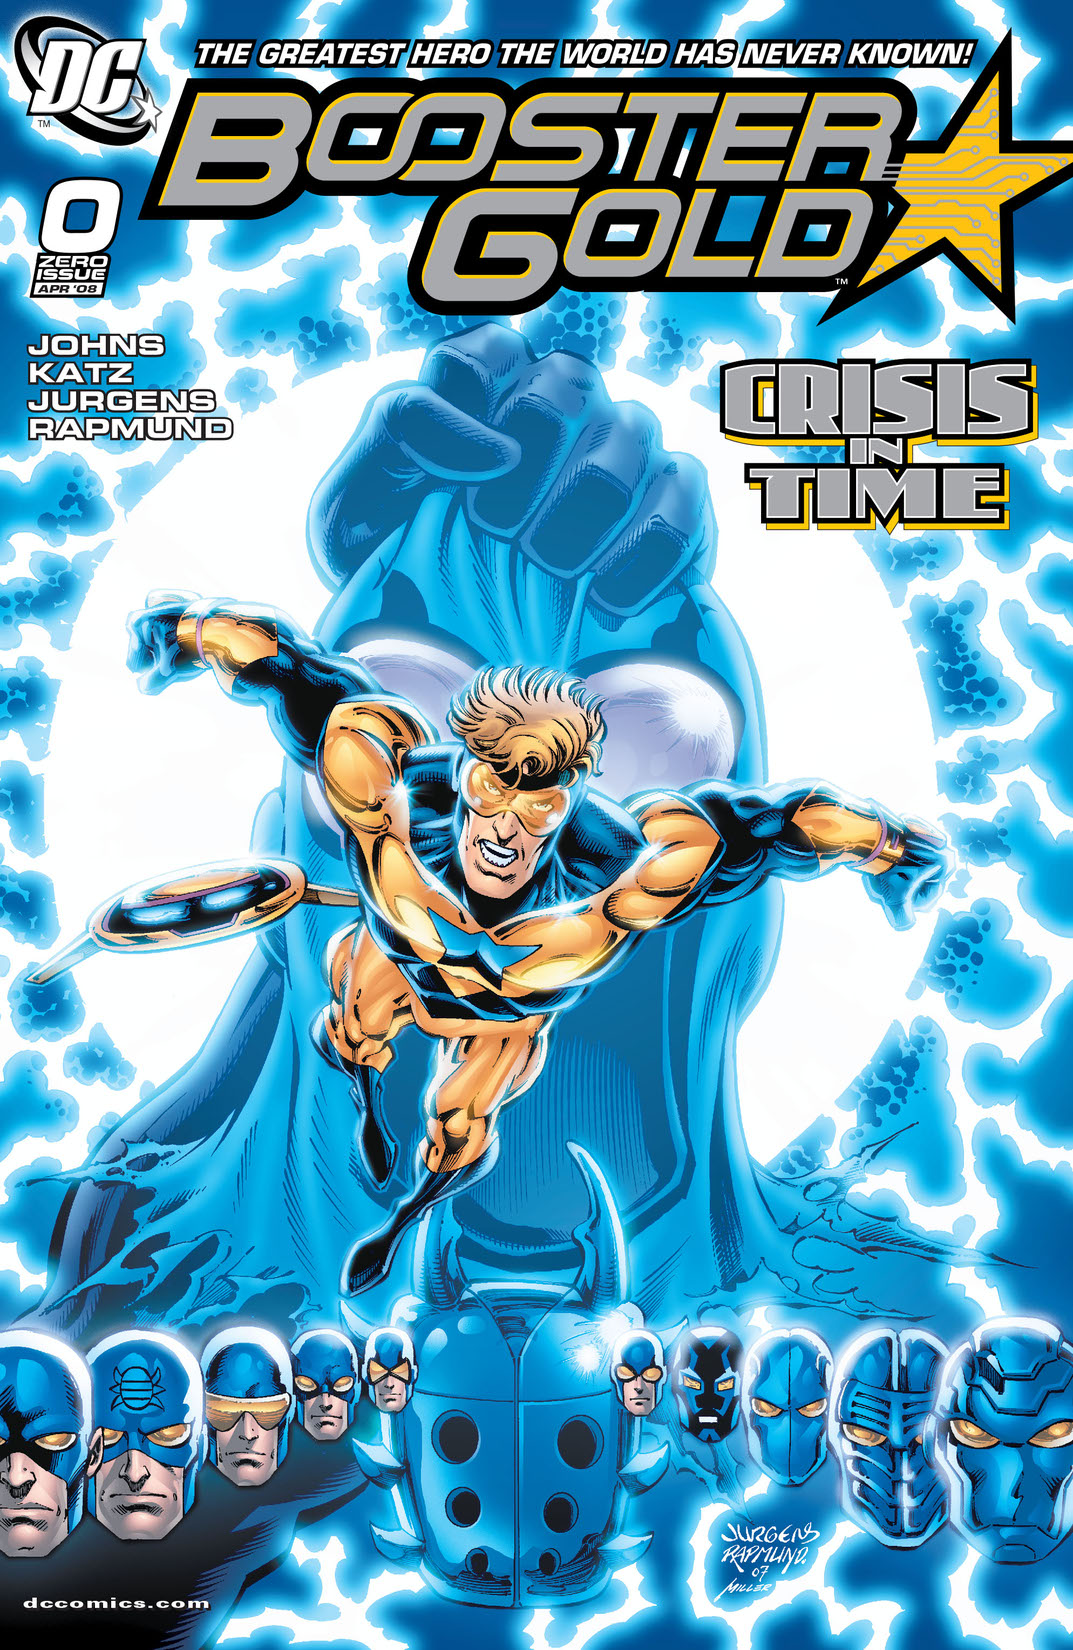 Booster Gold (2007-) #0 preview images